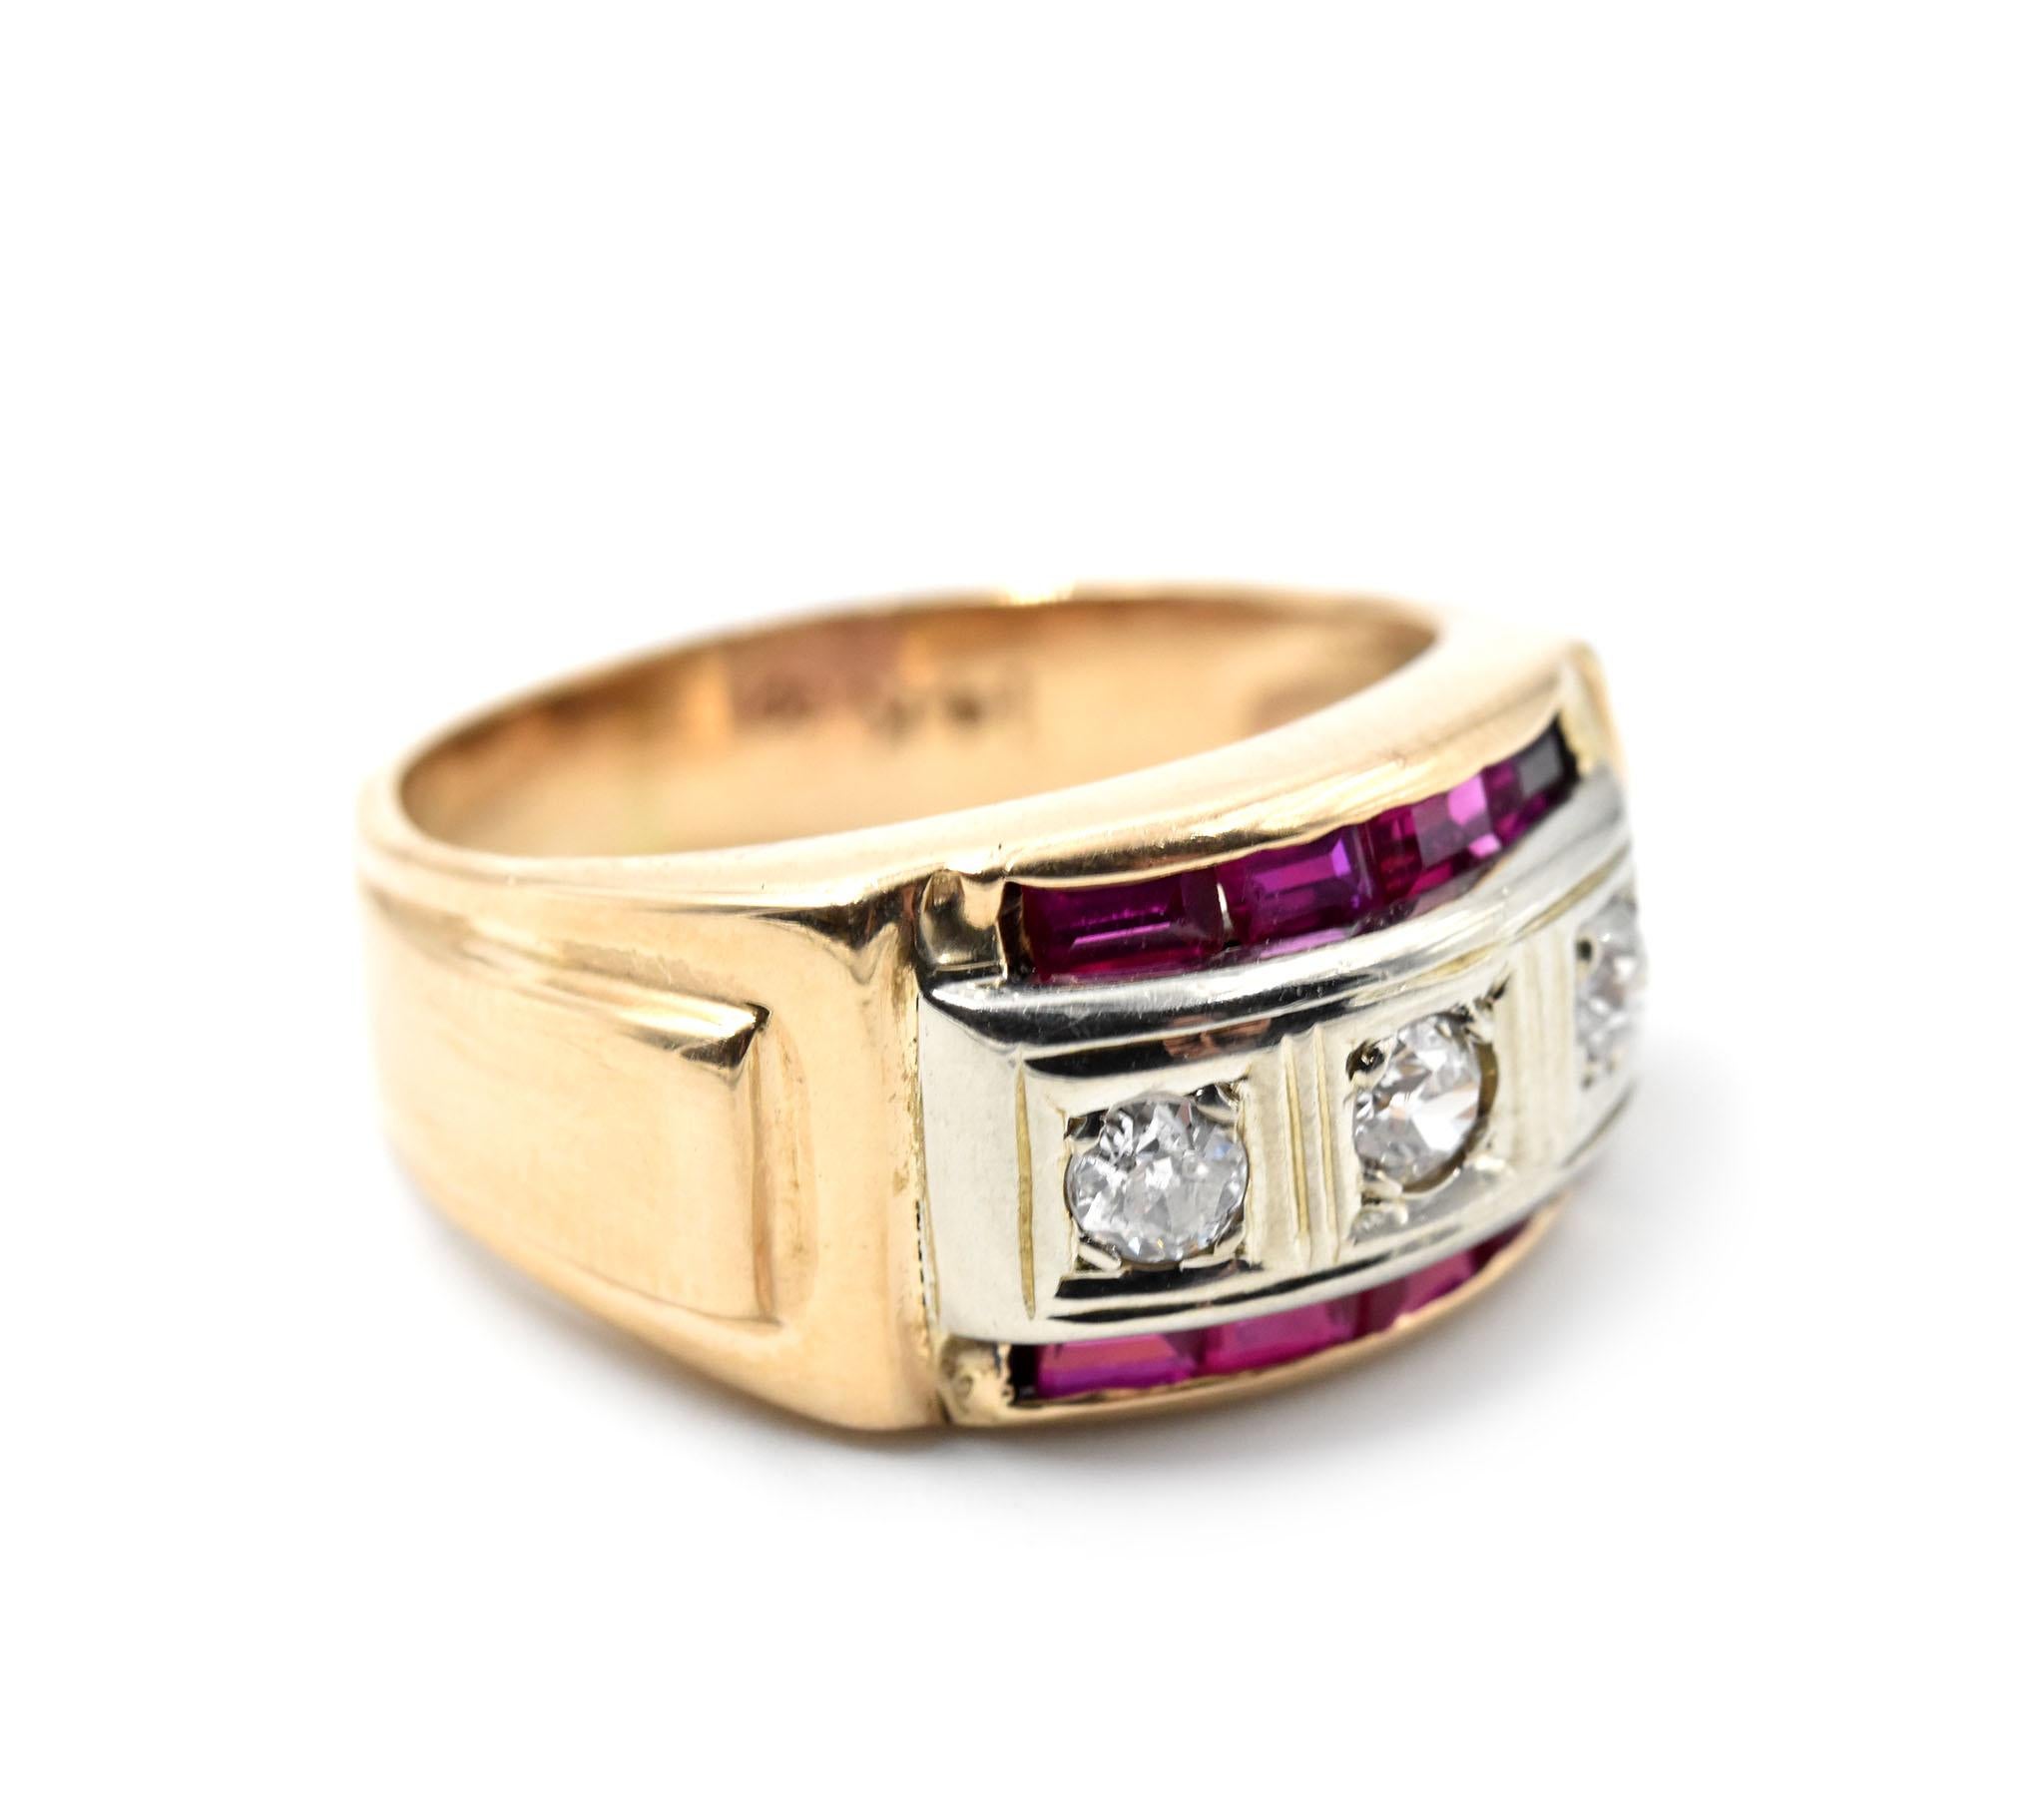 Designer: custom design
Material: 14k yellow gold
Rubies: 0.64 carat weight
Diamonds: three round brilliant cut = 0.27 carat weight
Ring Size: 9 (please allow two additional shipping days for sizing requests)
Weight: 9.45 grams
